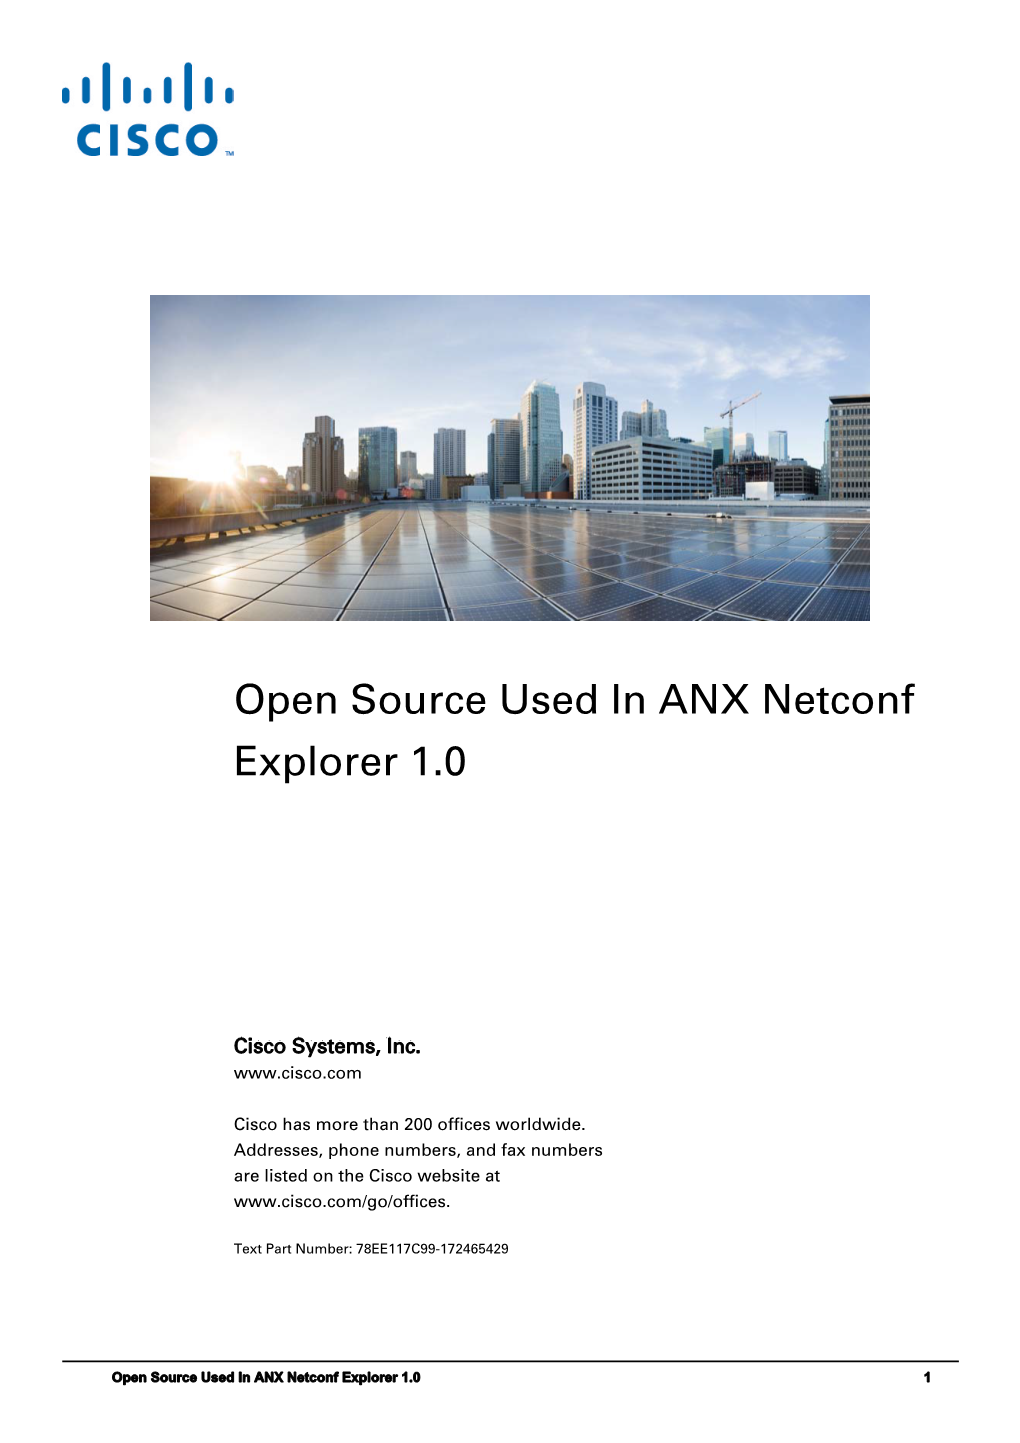 Open Source Used in ANX Netconf Explorer 1.0